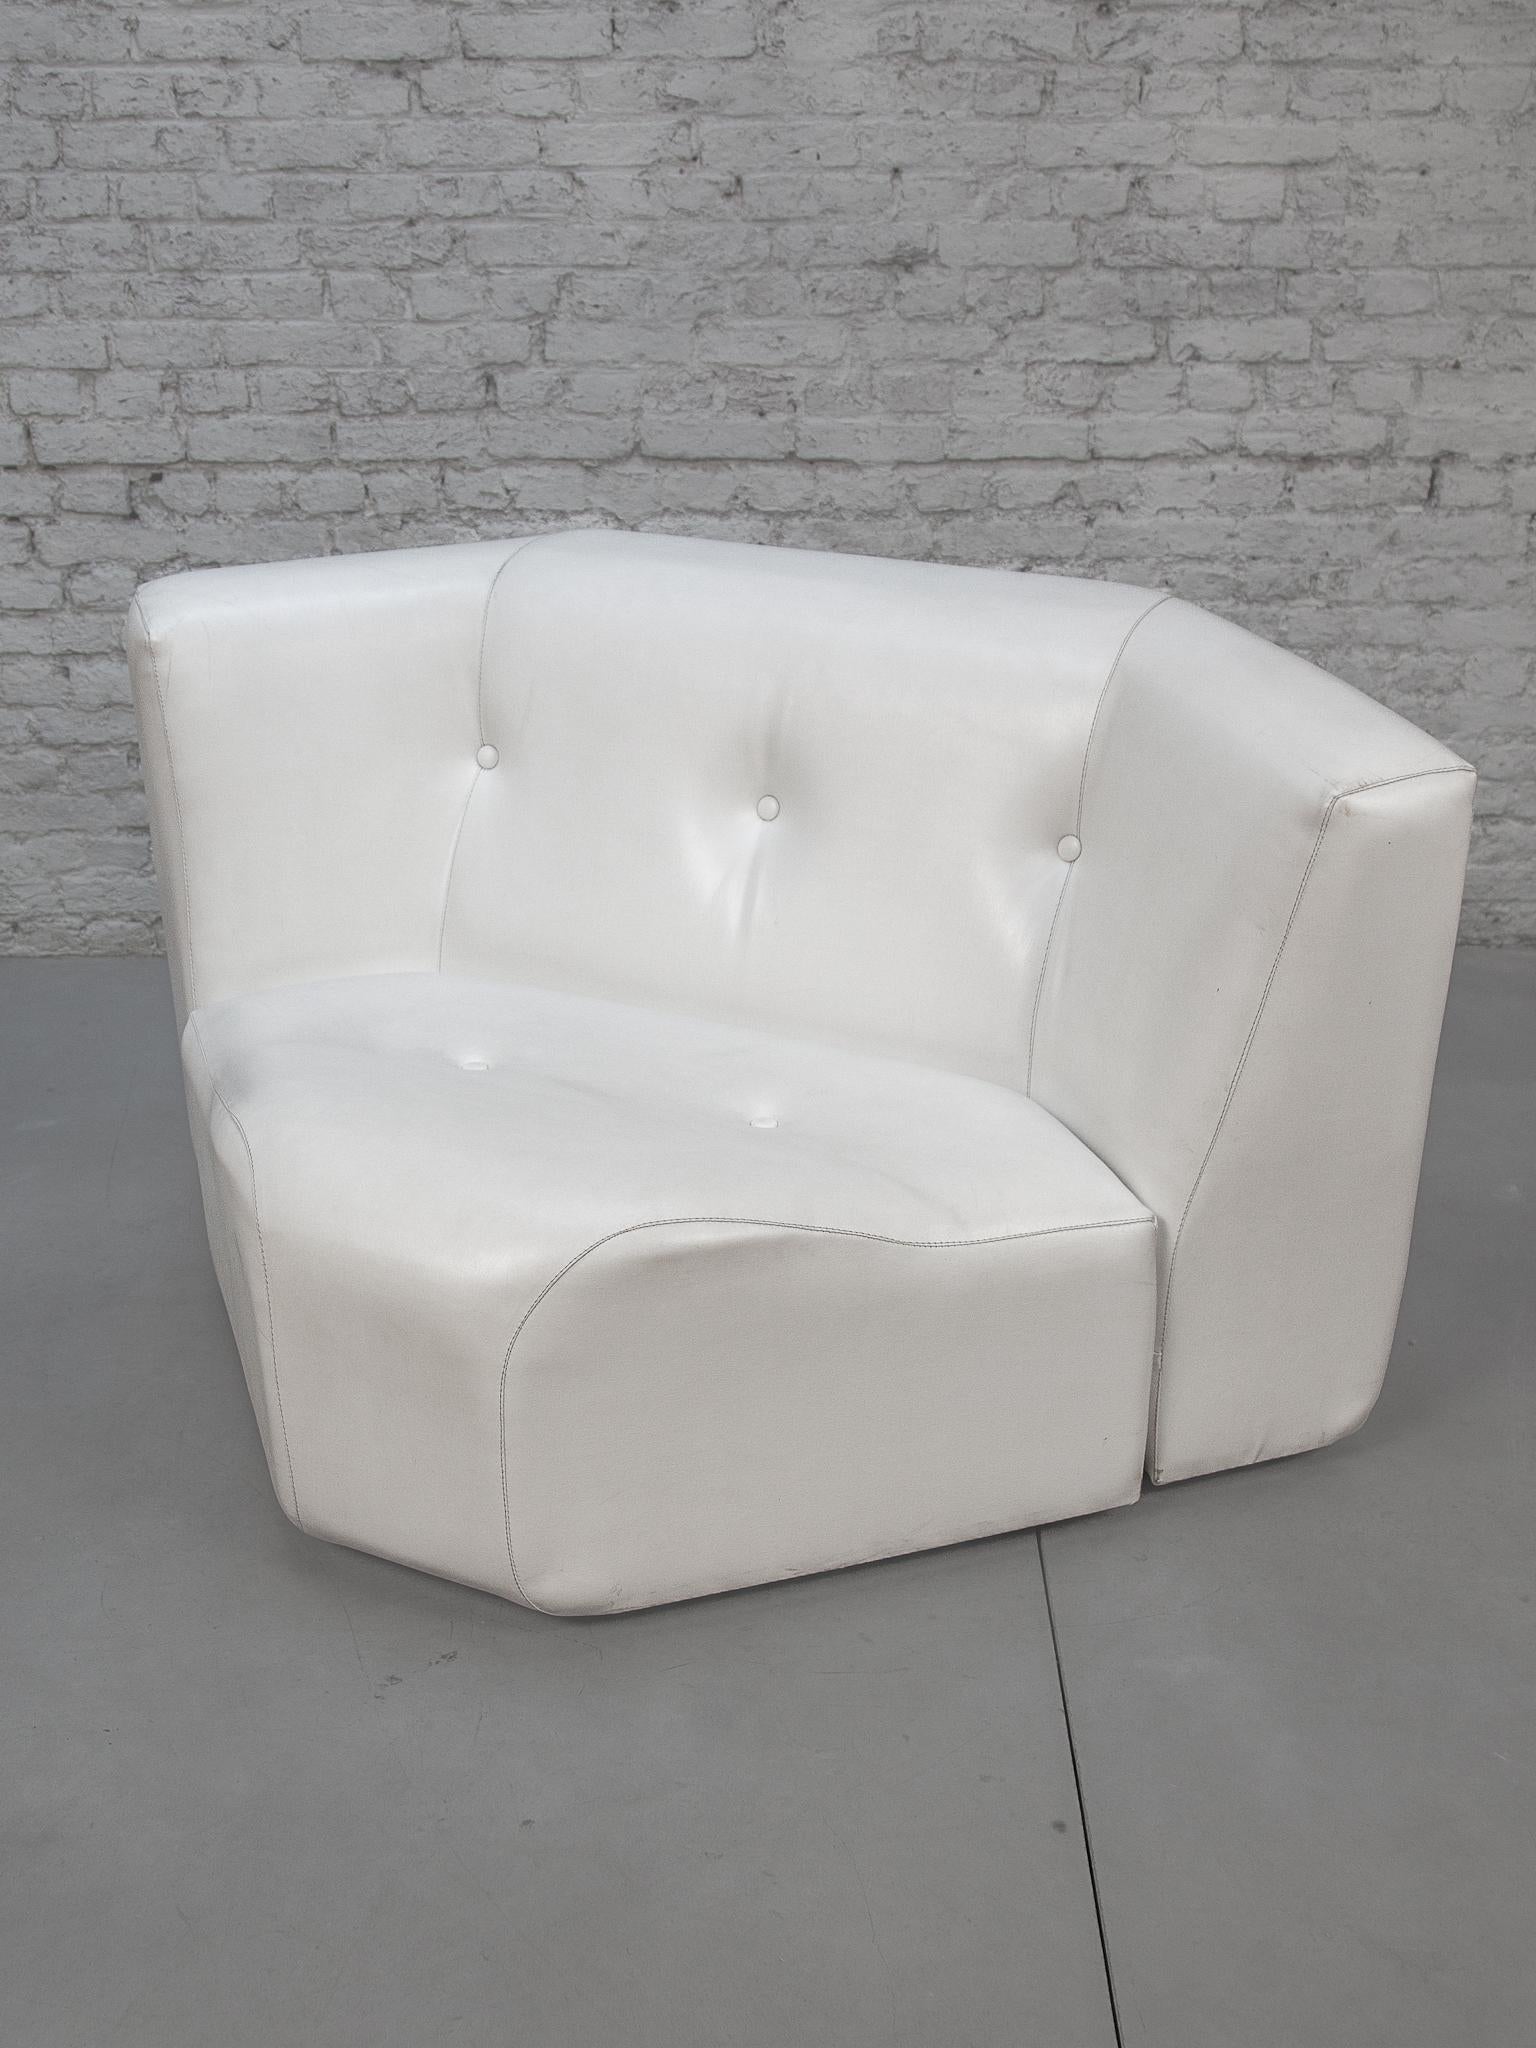 White and Chrome Livingroom set of Adriano Piazzesi Lounge Chairs and Footstools For Sale 6